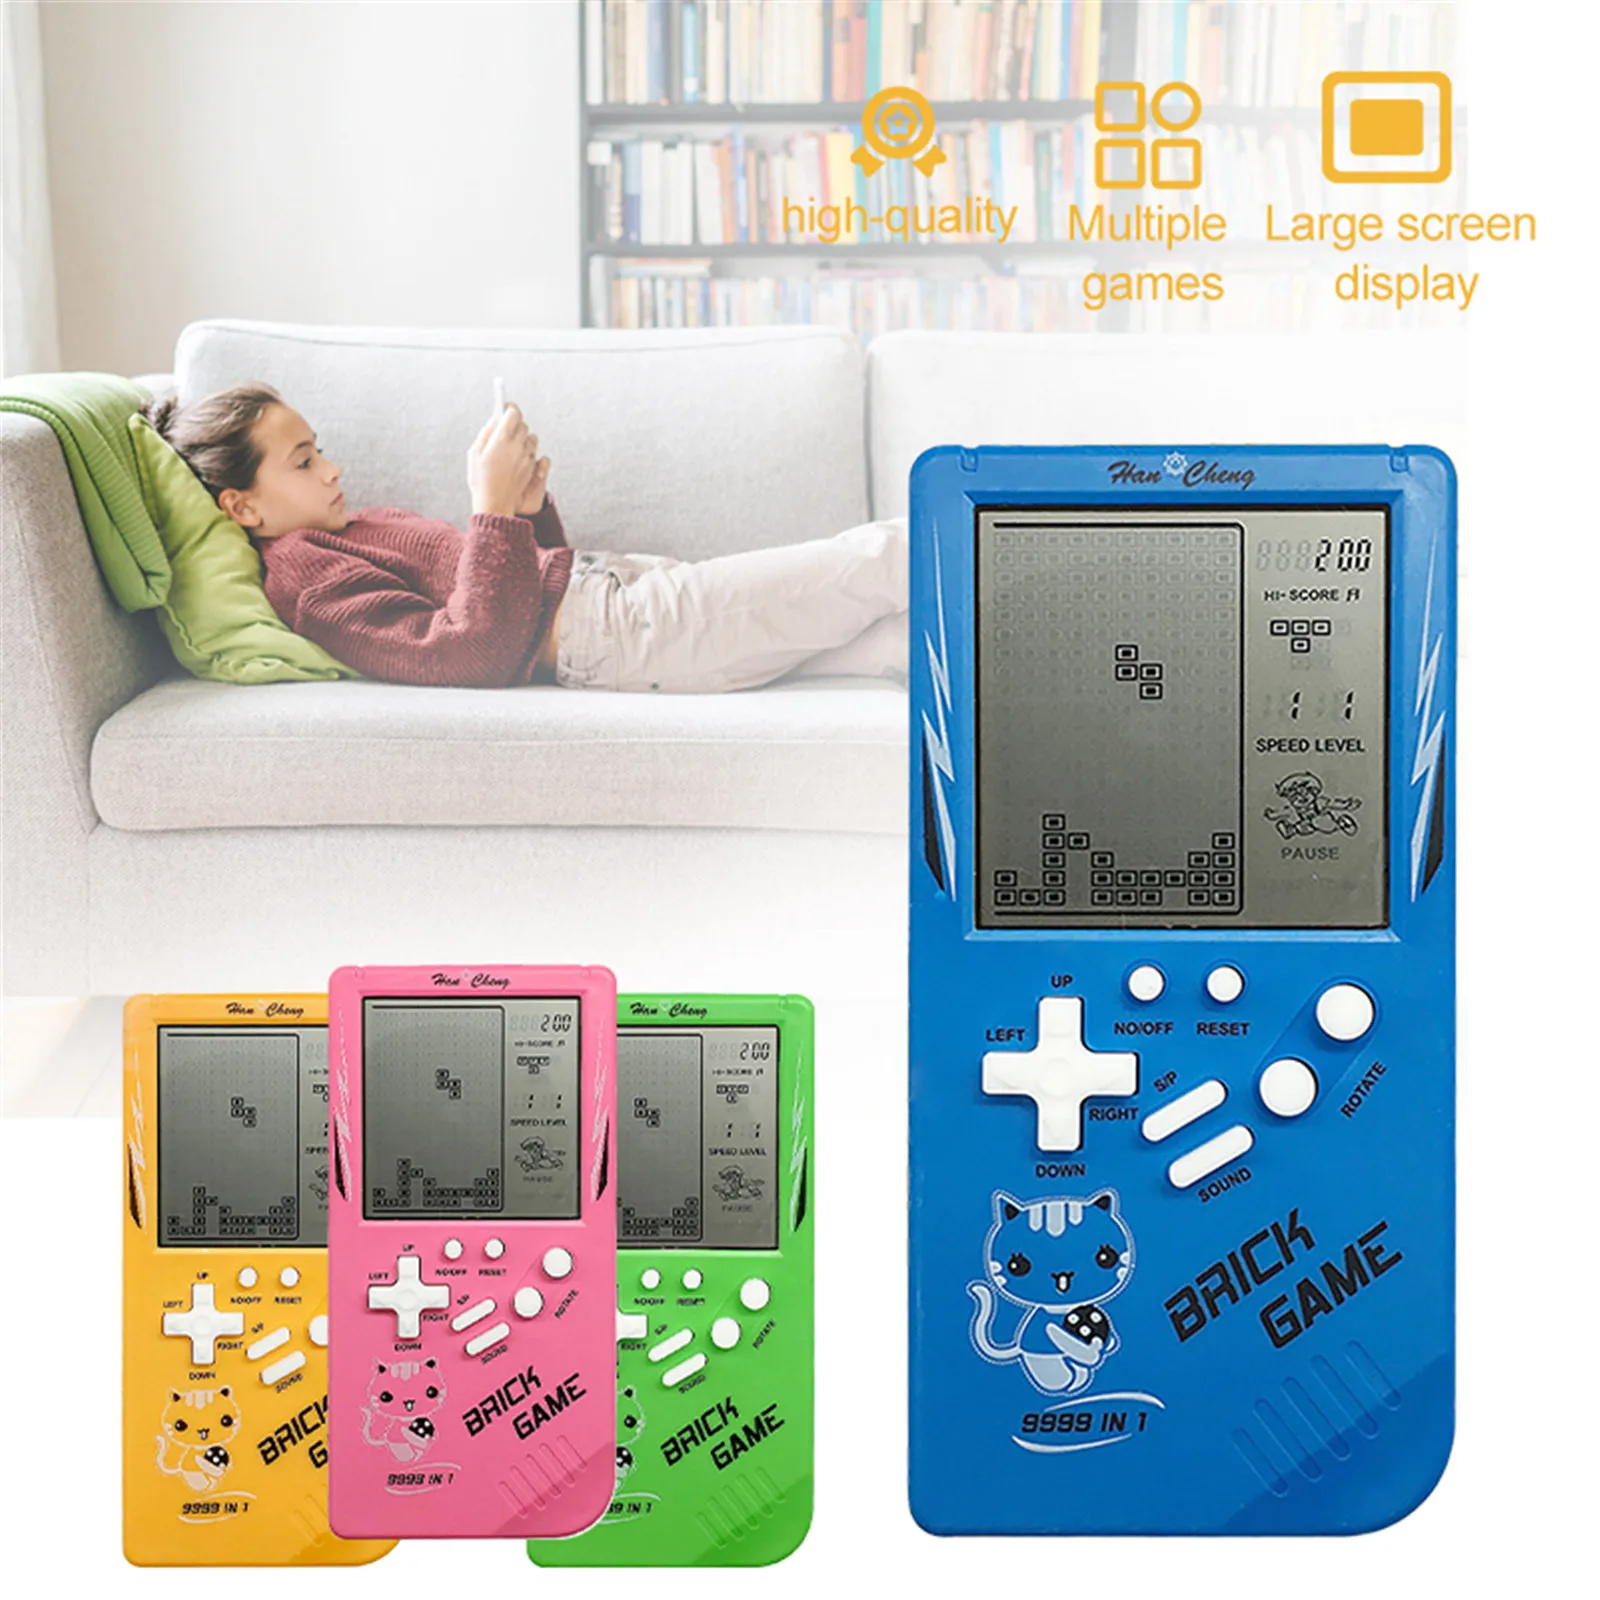 

8090 Nostalgic Classic Tetris Portable Handheld Game Console 3.5 Inches with Large Screen Brick Game Decompression Toy Gift